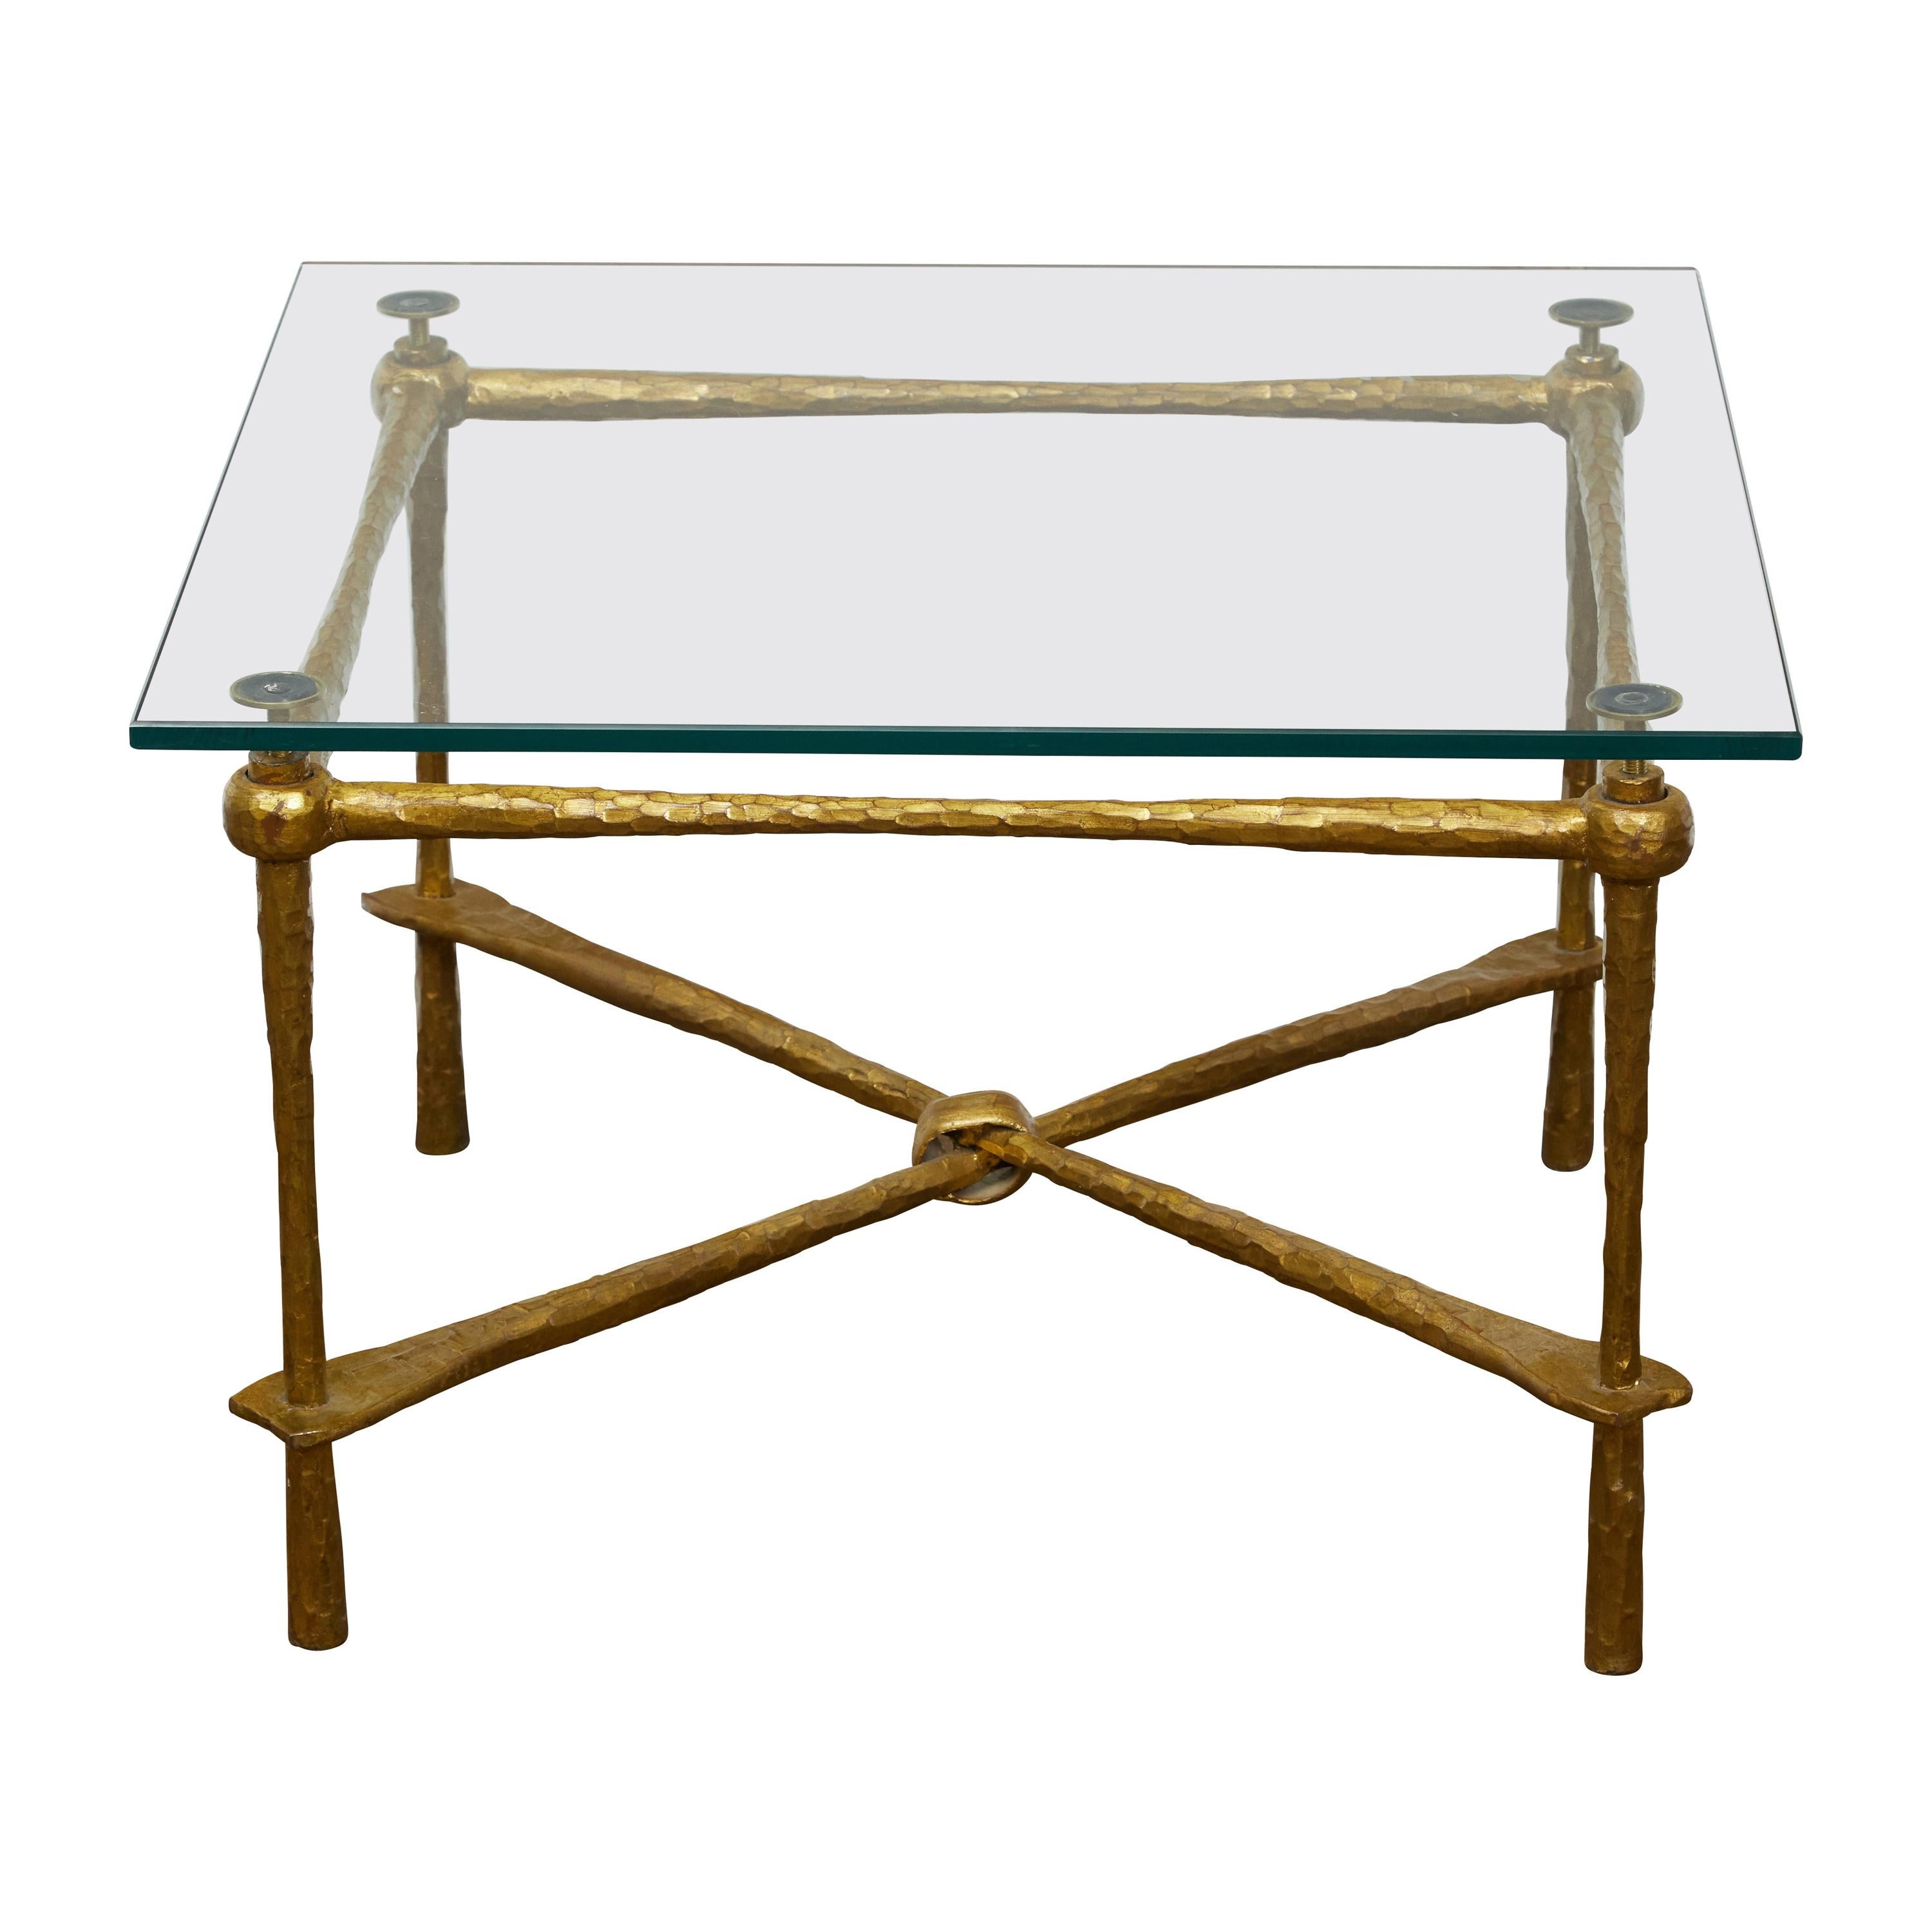 Italian Midcentury Gilt Metal Coffee Table with Glass Top and Hammered Accents